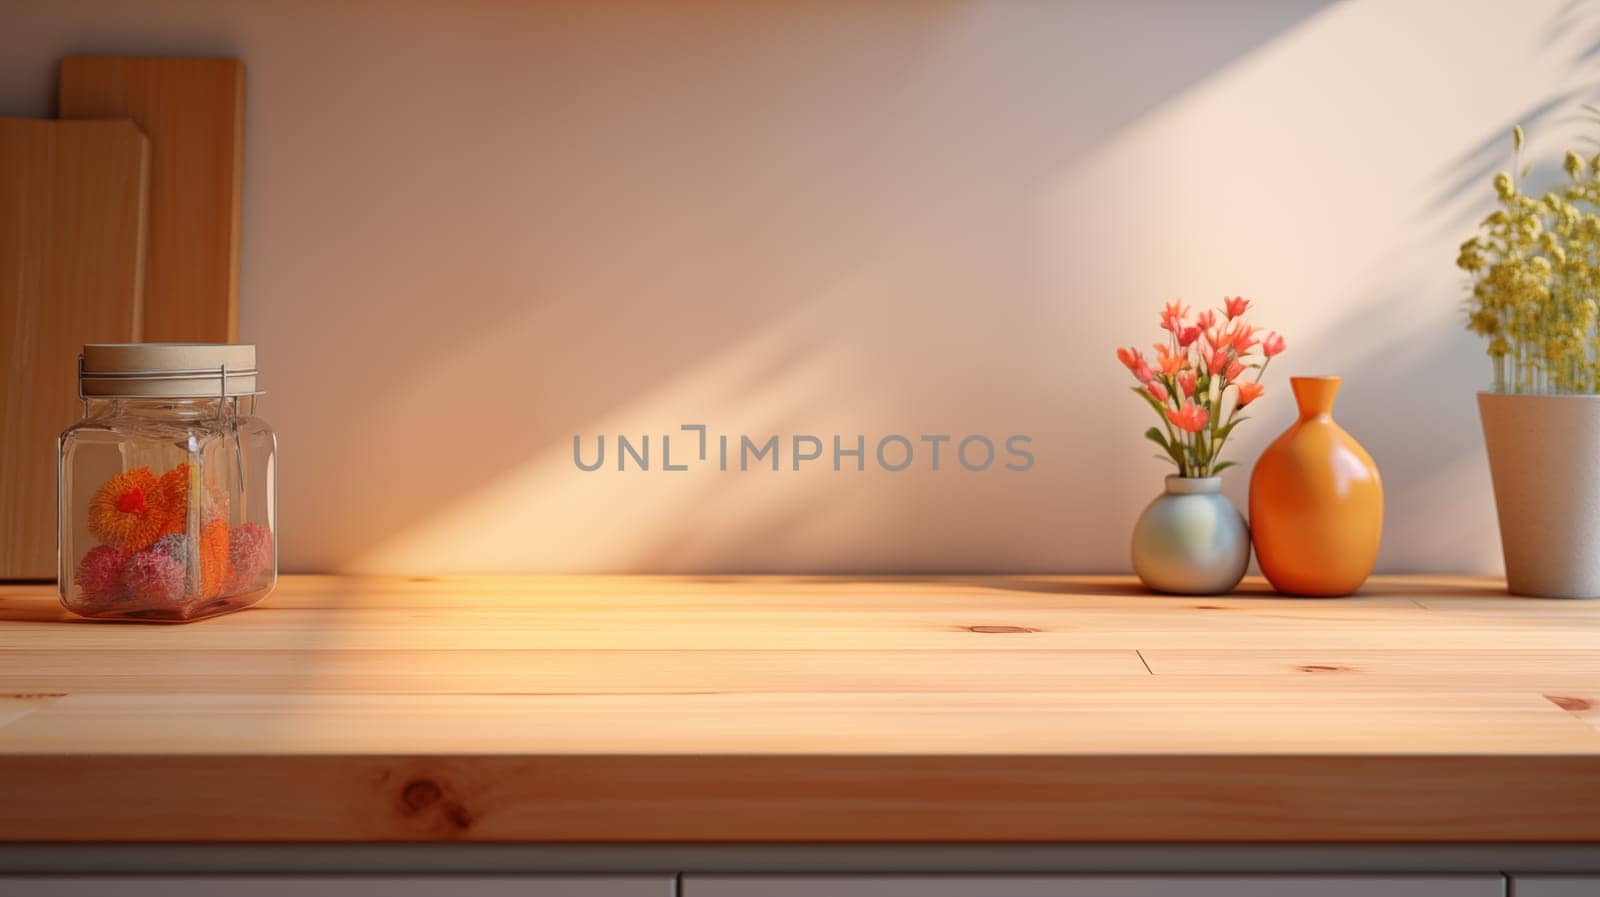 wooden countertop with a glass jar and a vase of flowers, against the background of a peach wall, in the kitchen